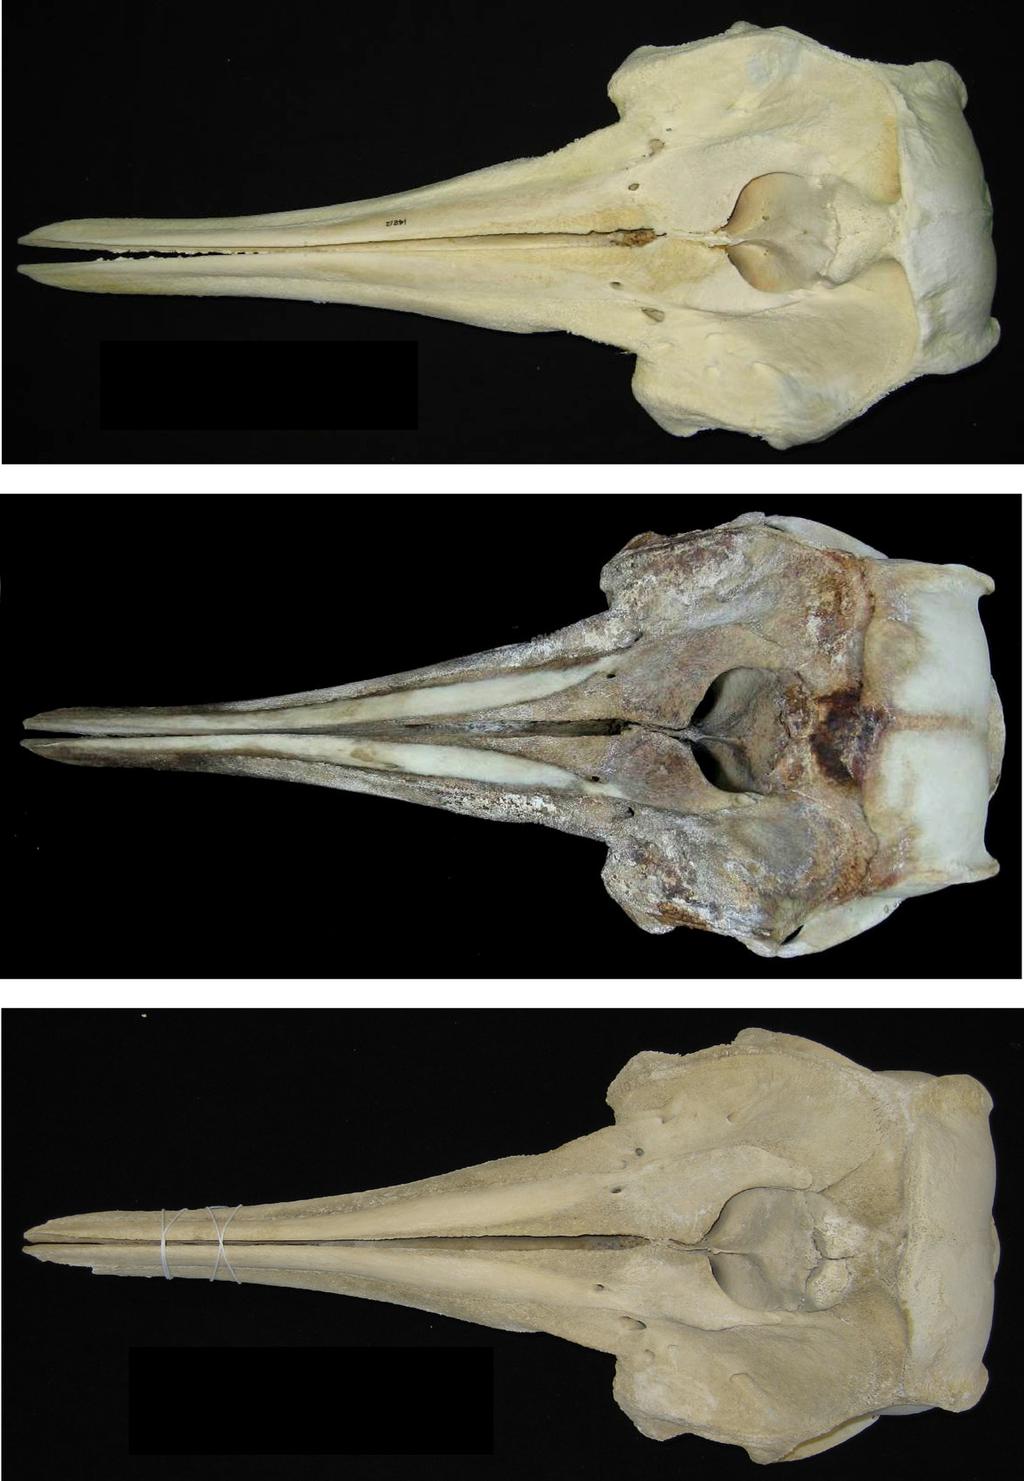 Wang et al. Zoological Studies (2015) 54:36 Page 12 of 15 A B C Figure 6 Dorsal views of the calvariae of Sousa chinensis taiwanensis specimens.